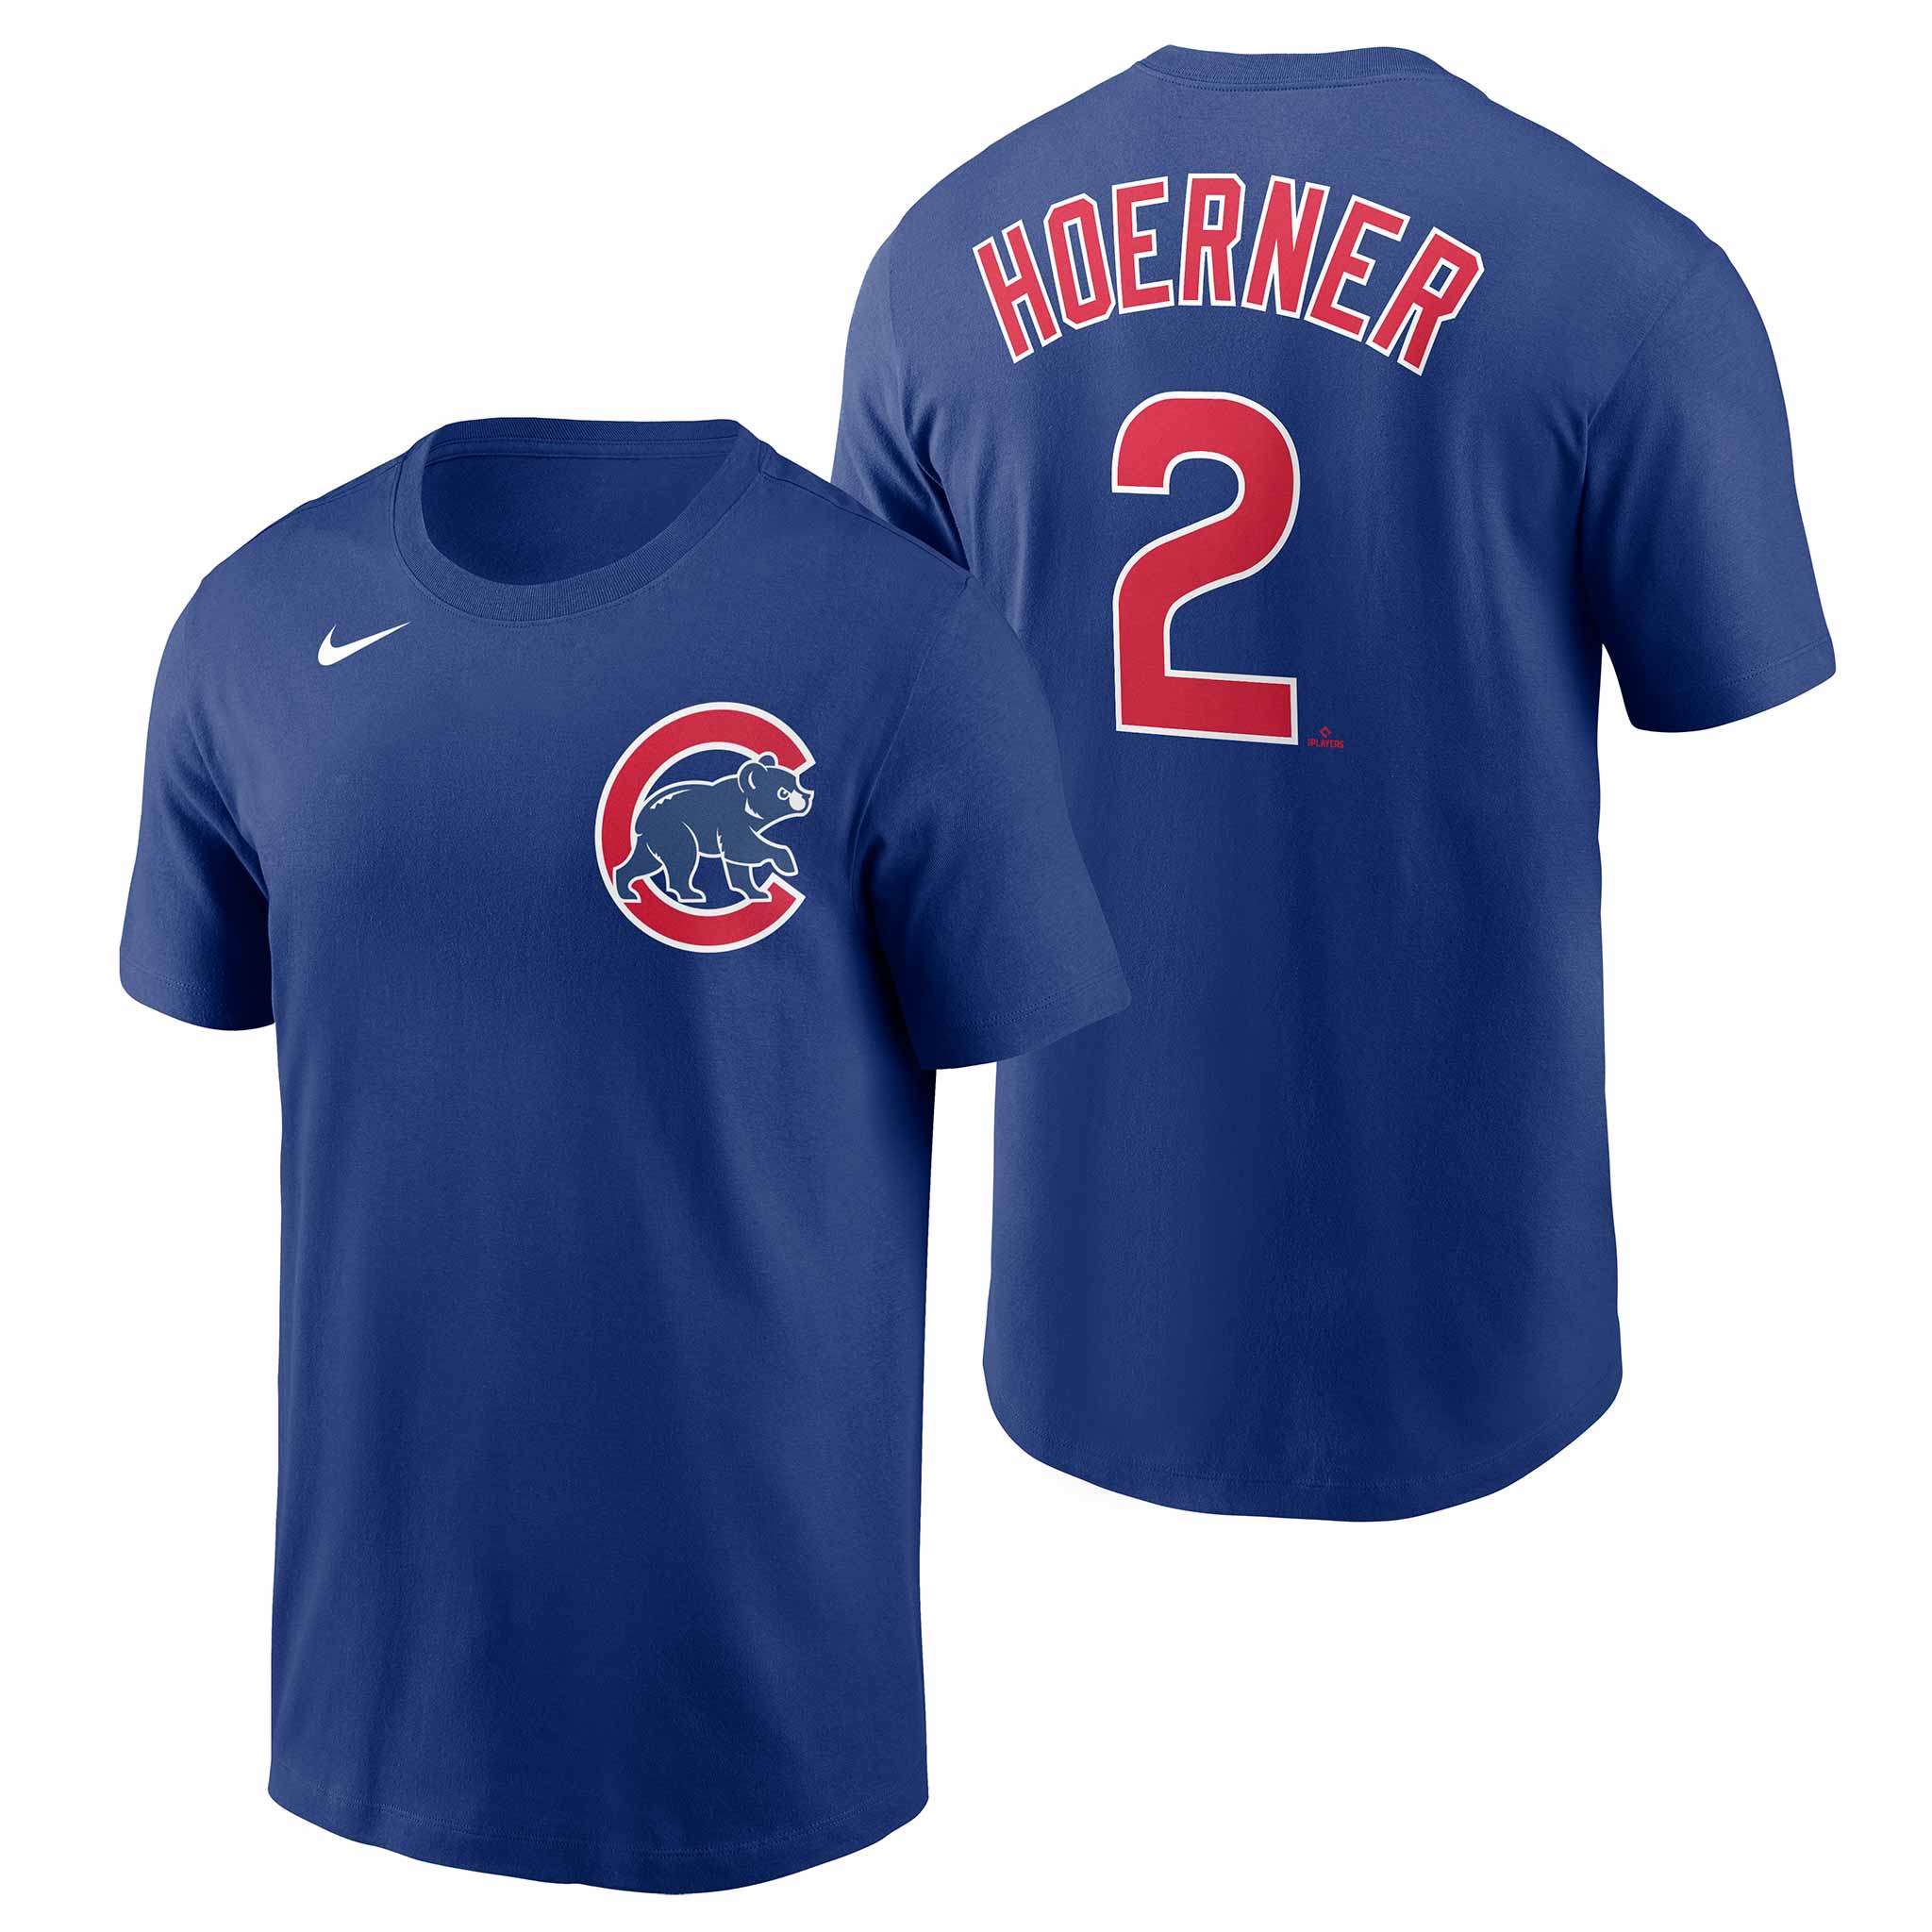 Chicago Cubs Women's Plus Size Sanitized Replica Team Jersey - Royal